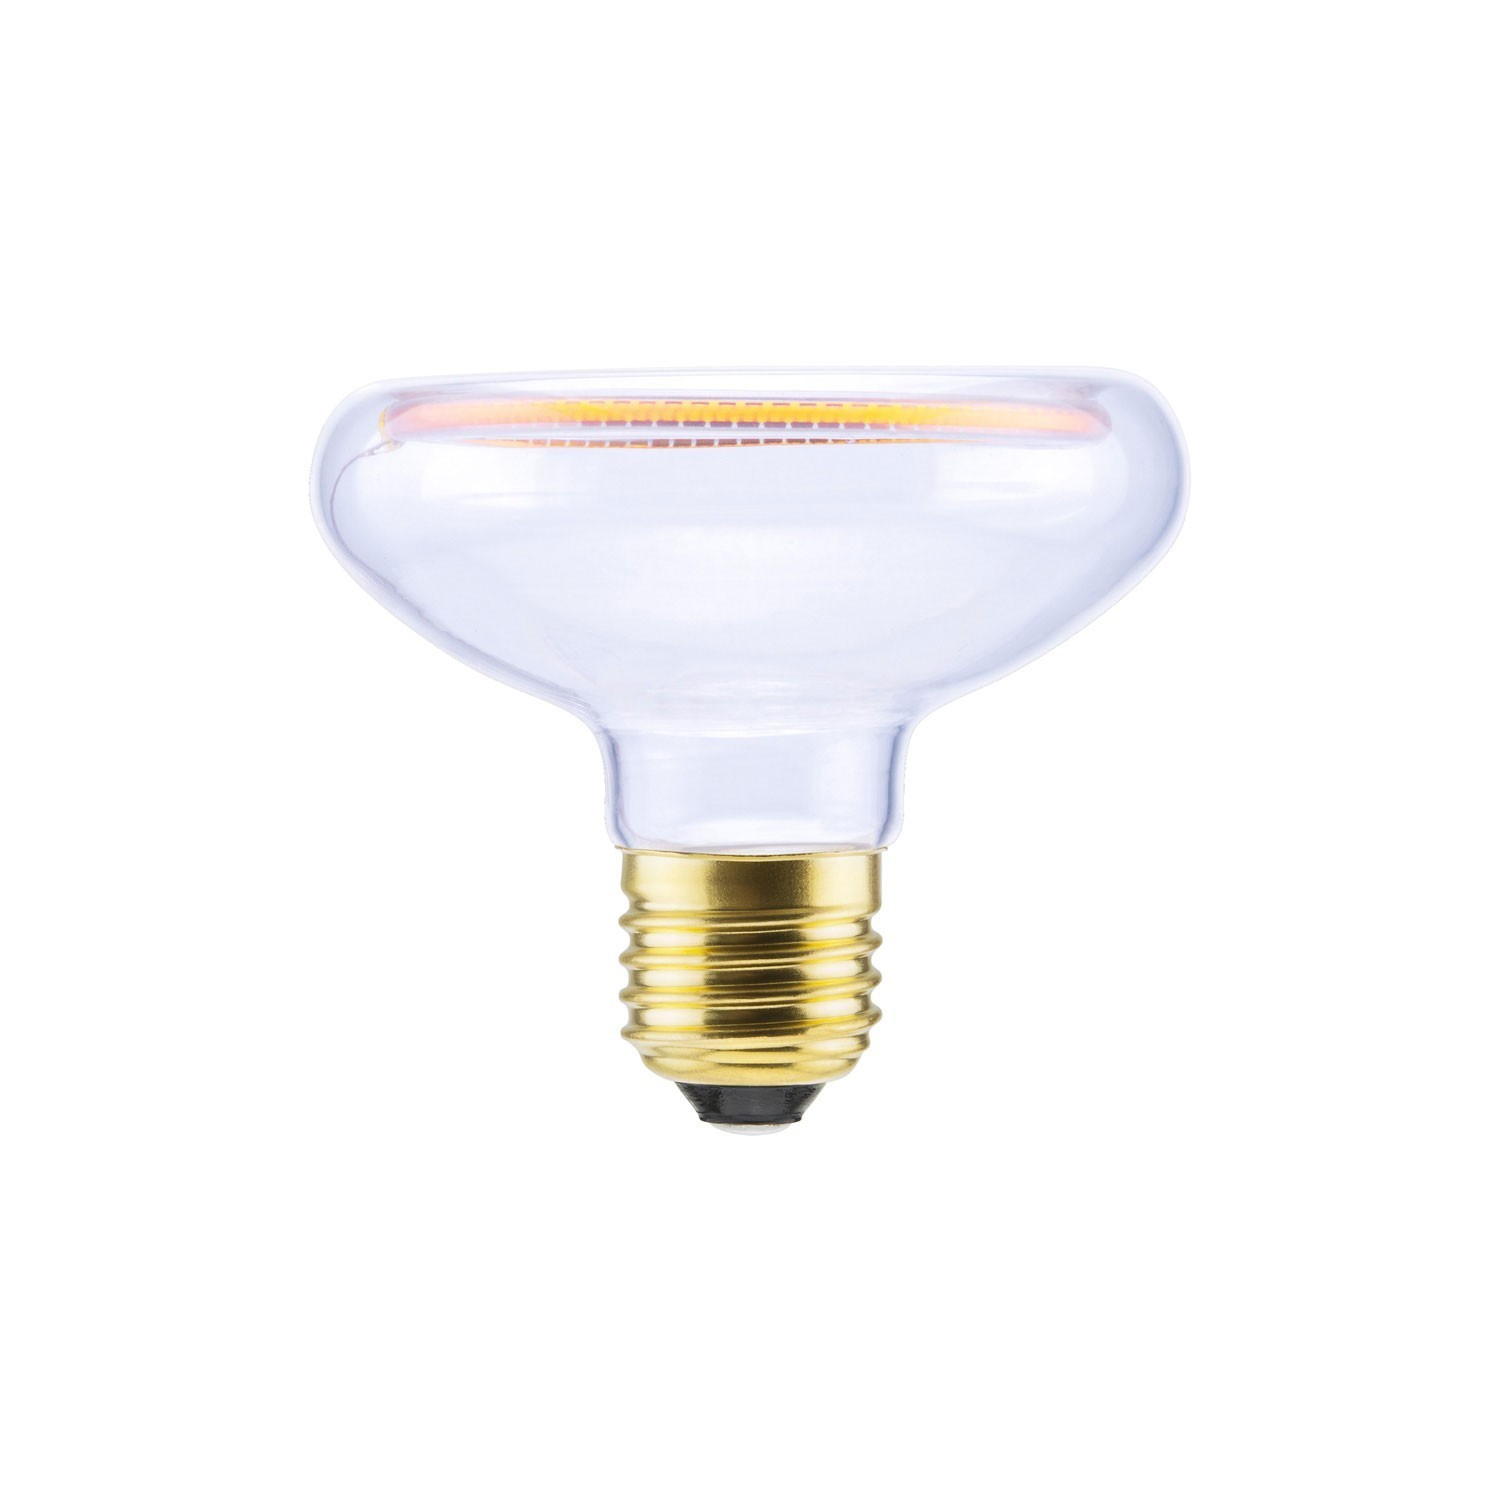 LED Reflector R80 Clear Floating Line 6W 300Lm 1900K bulb Dimmable